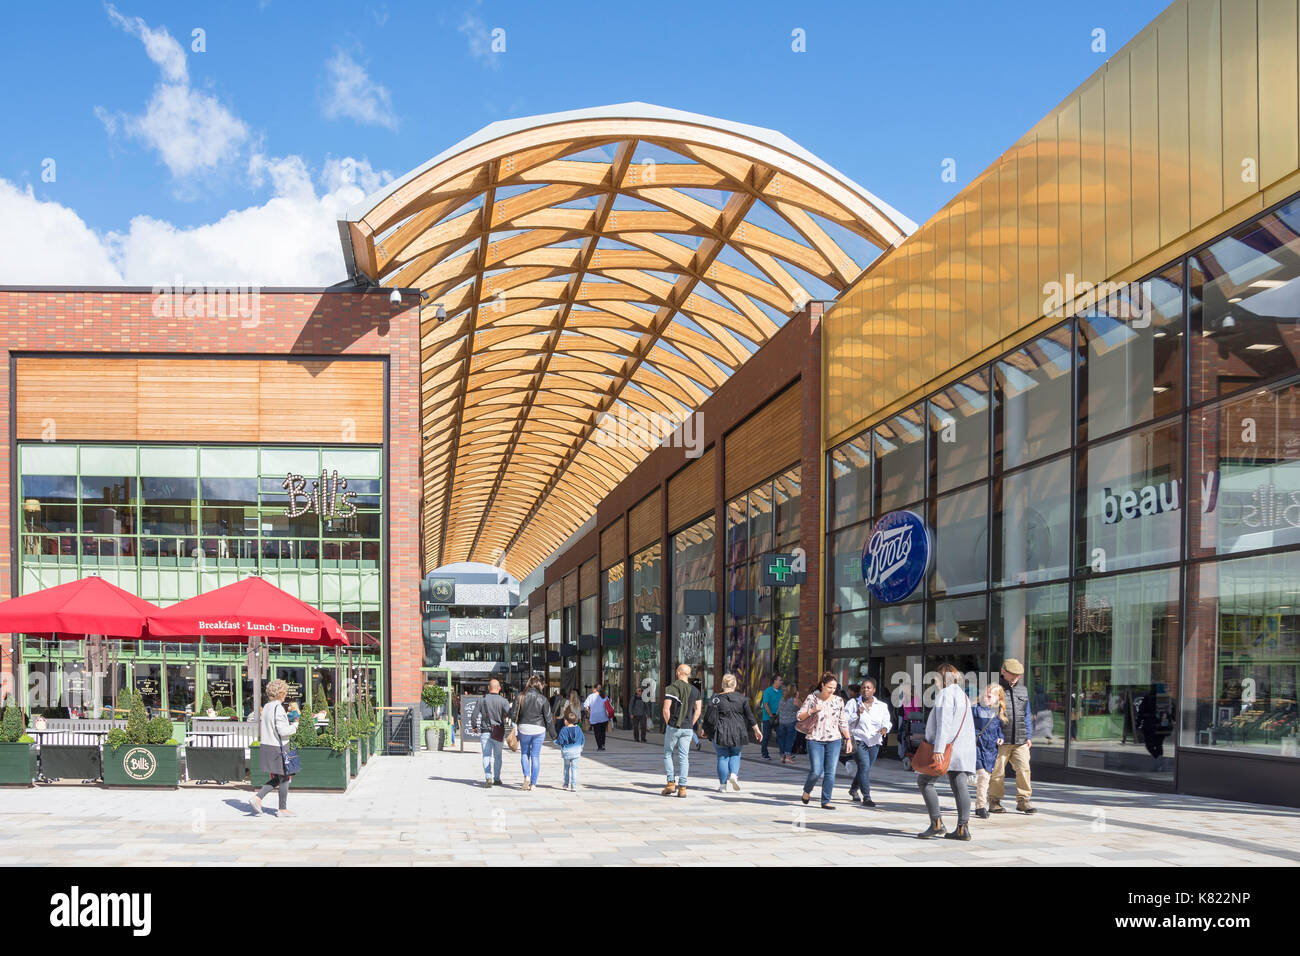 Braccan Walk shopping street from Union Square, The Lexicon, Bracknell, Berkshire, England, United Kingdom Stock Photo